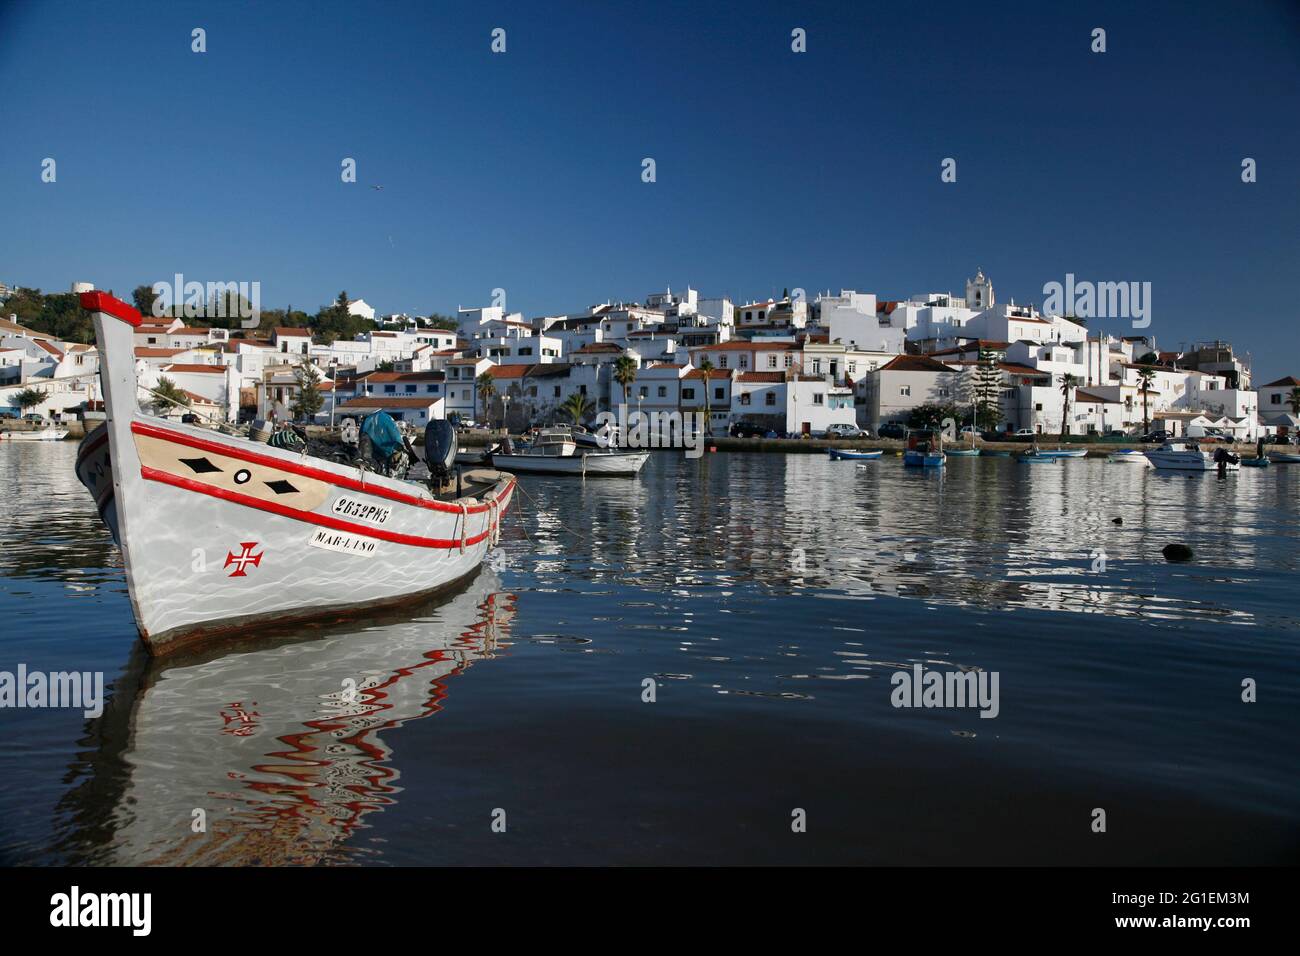 A general view of Ferragudo, a charming fishing town situated on the eastern side of the Arada River on the western border of the municipality of Lagoa, in Portugal and which is often claimed to be the prettiest village in the Algarve. Picture date: Monday August 4, 2008. Stock Photo